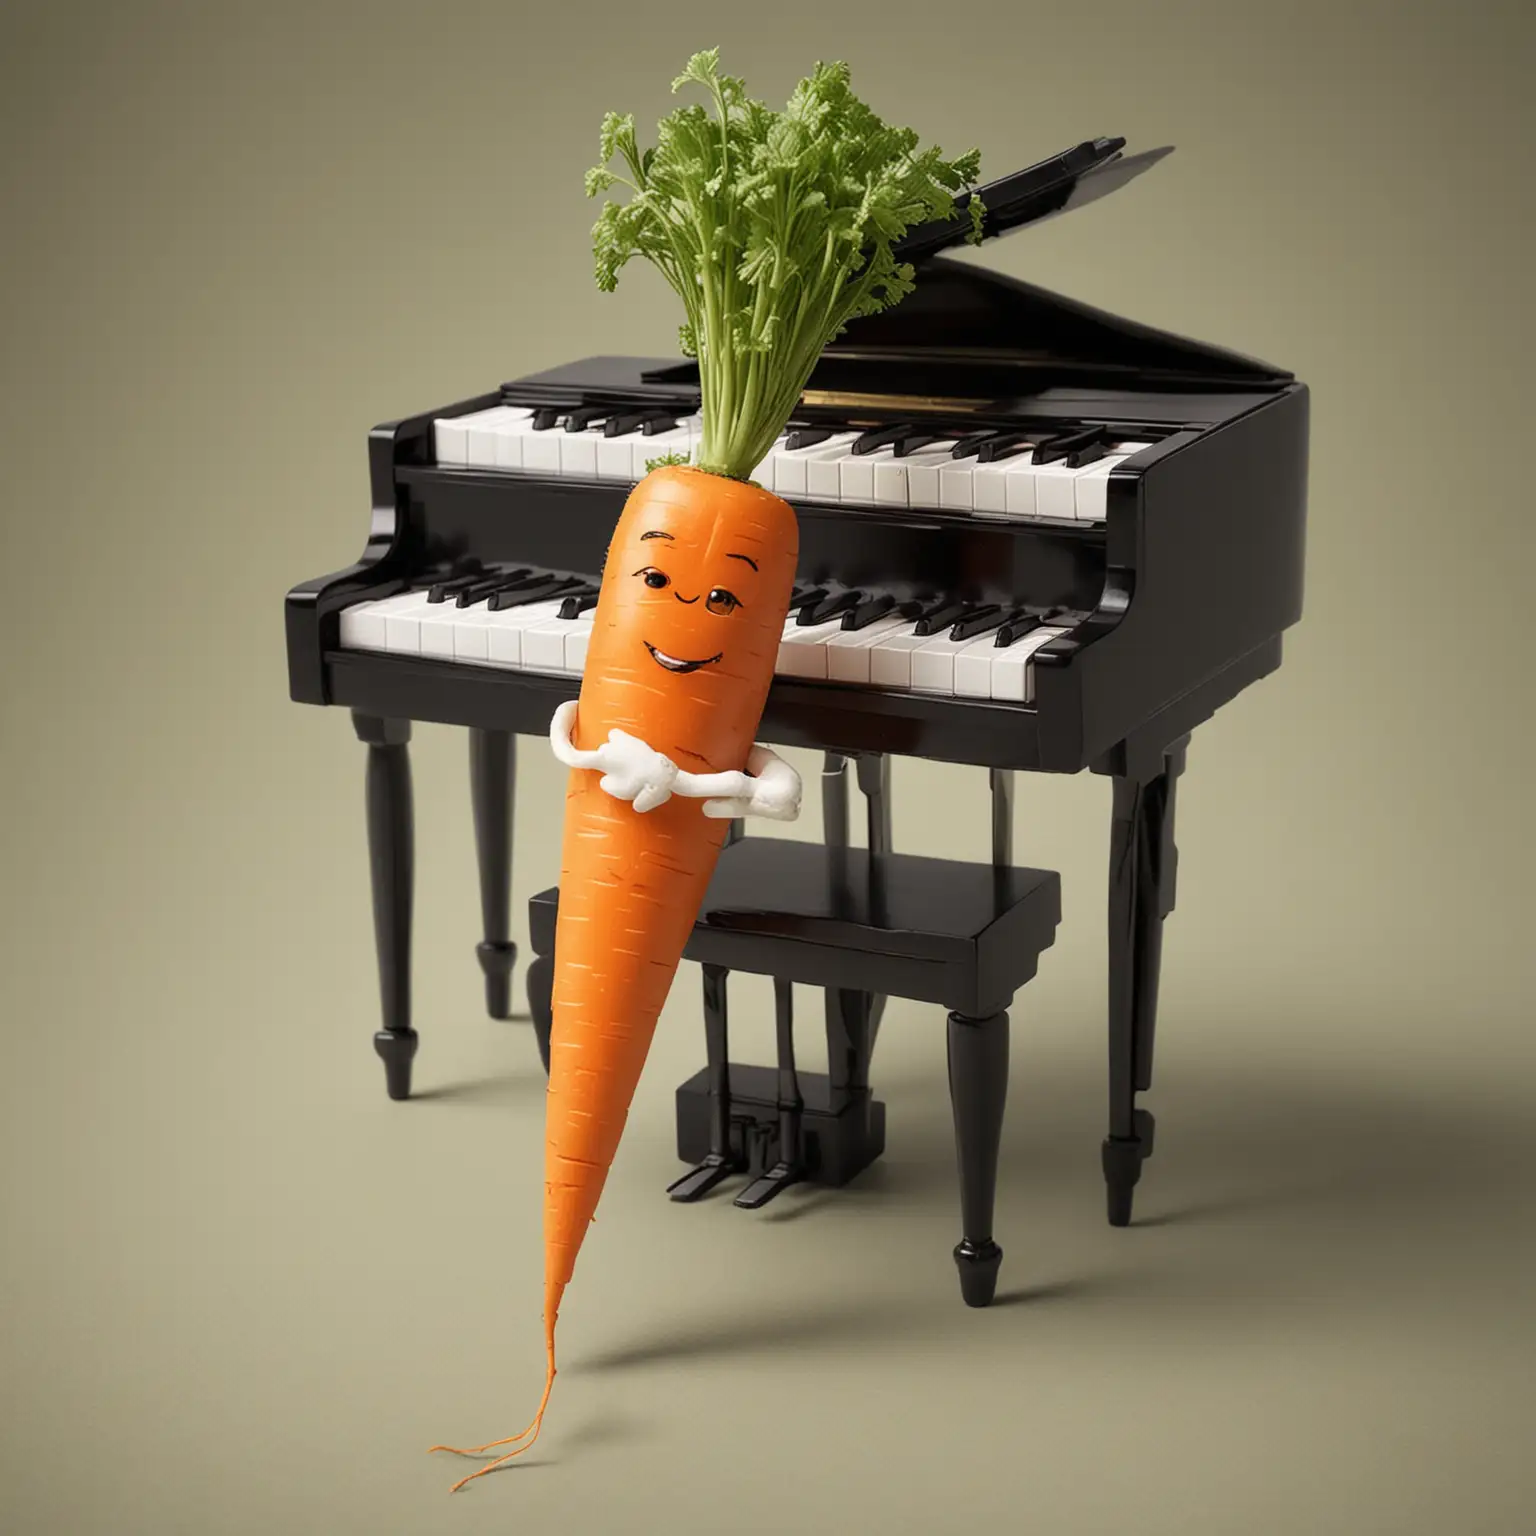 Carrot Playing Piano with Human Leg as Audience